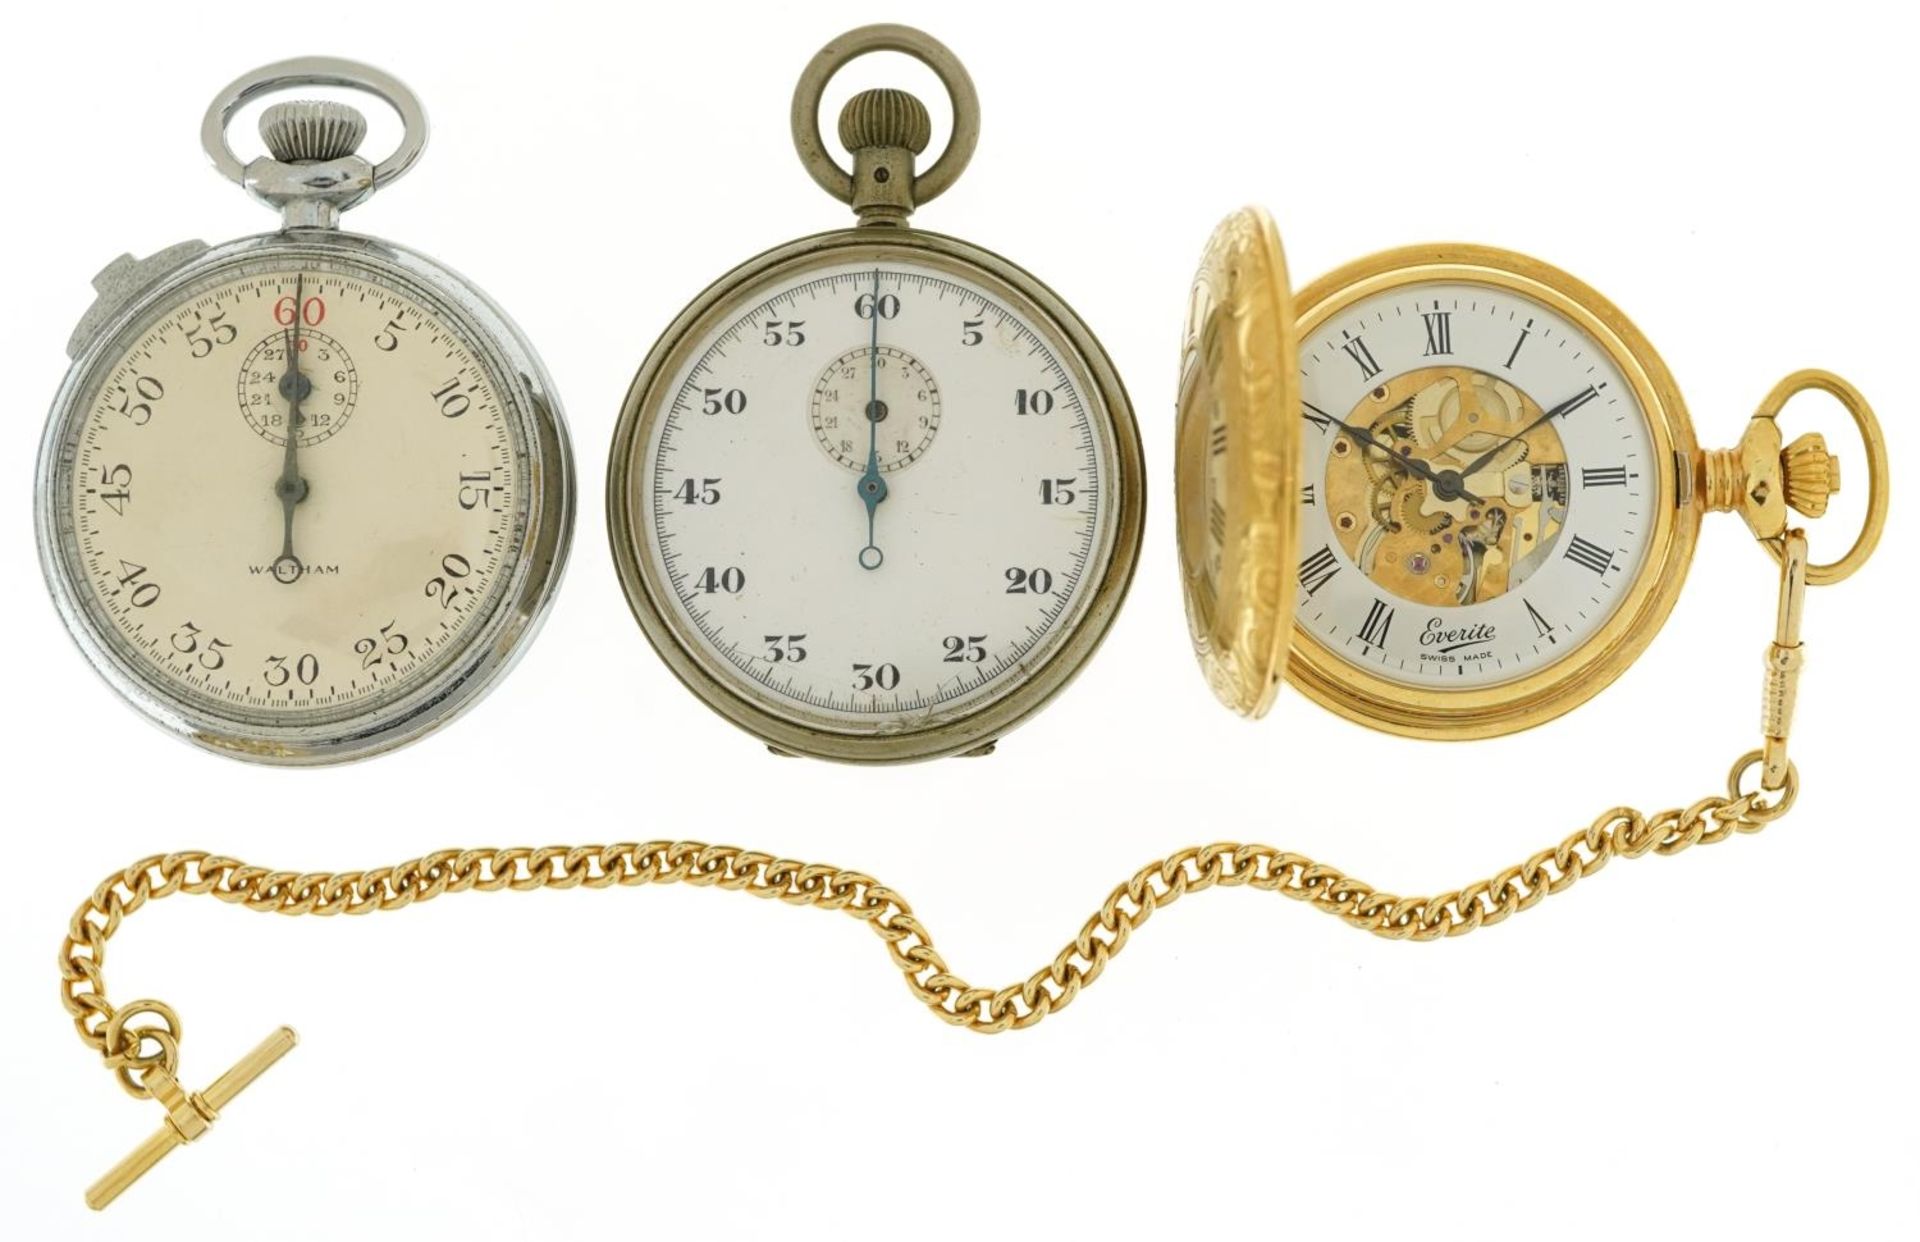 Three pocket watches including British military interest Waltham stopwatch and a gold plated half